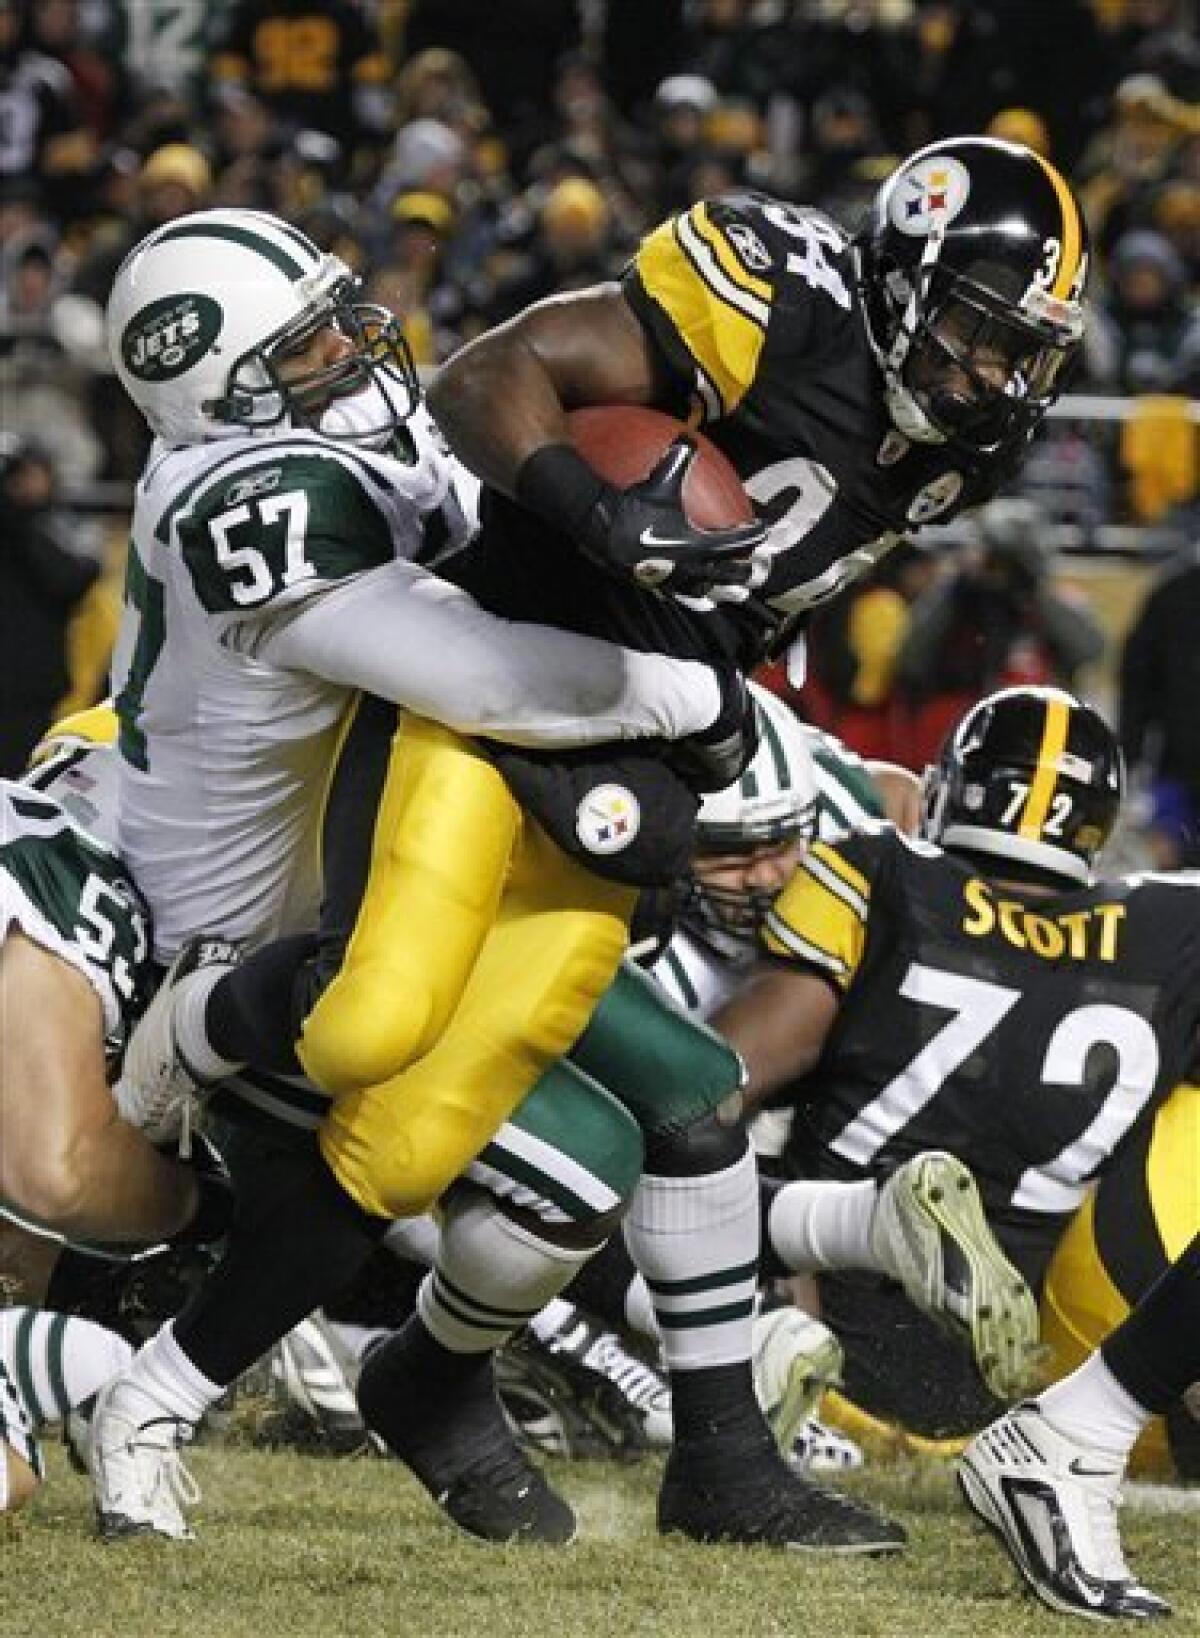 AFC title game: Steelers lead Jets 7-0 after 1 - The San Diego Union-Tribune